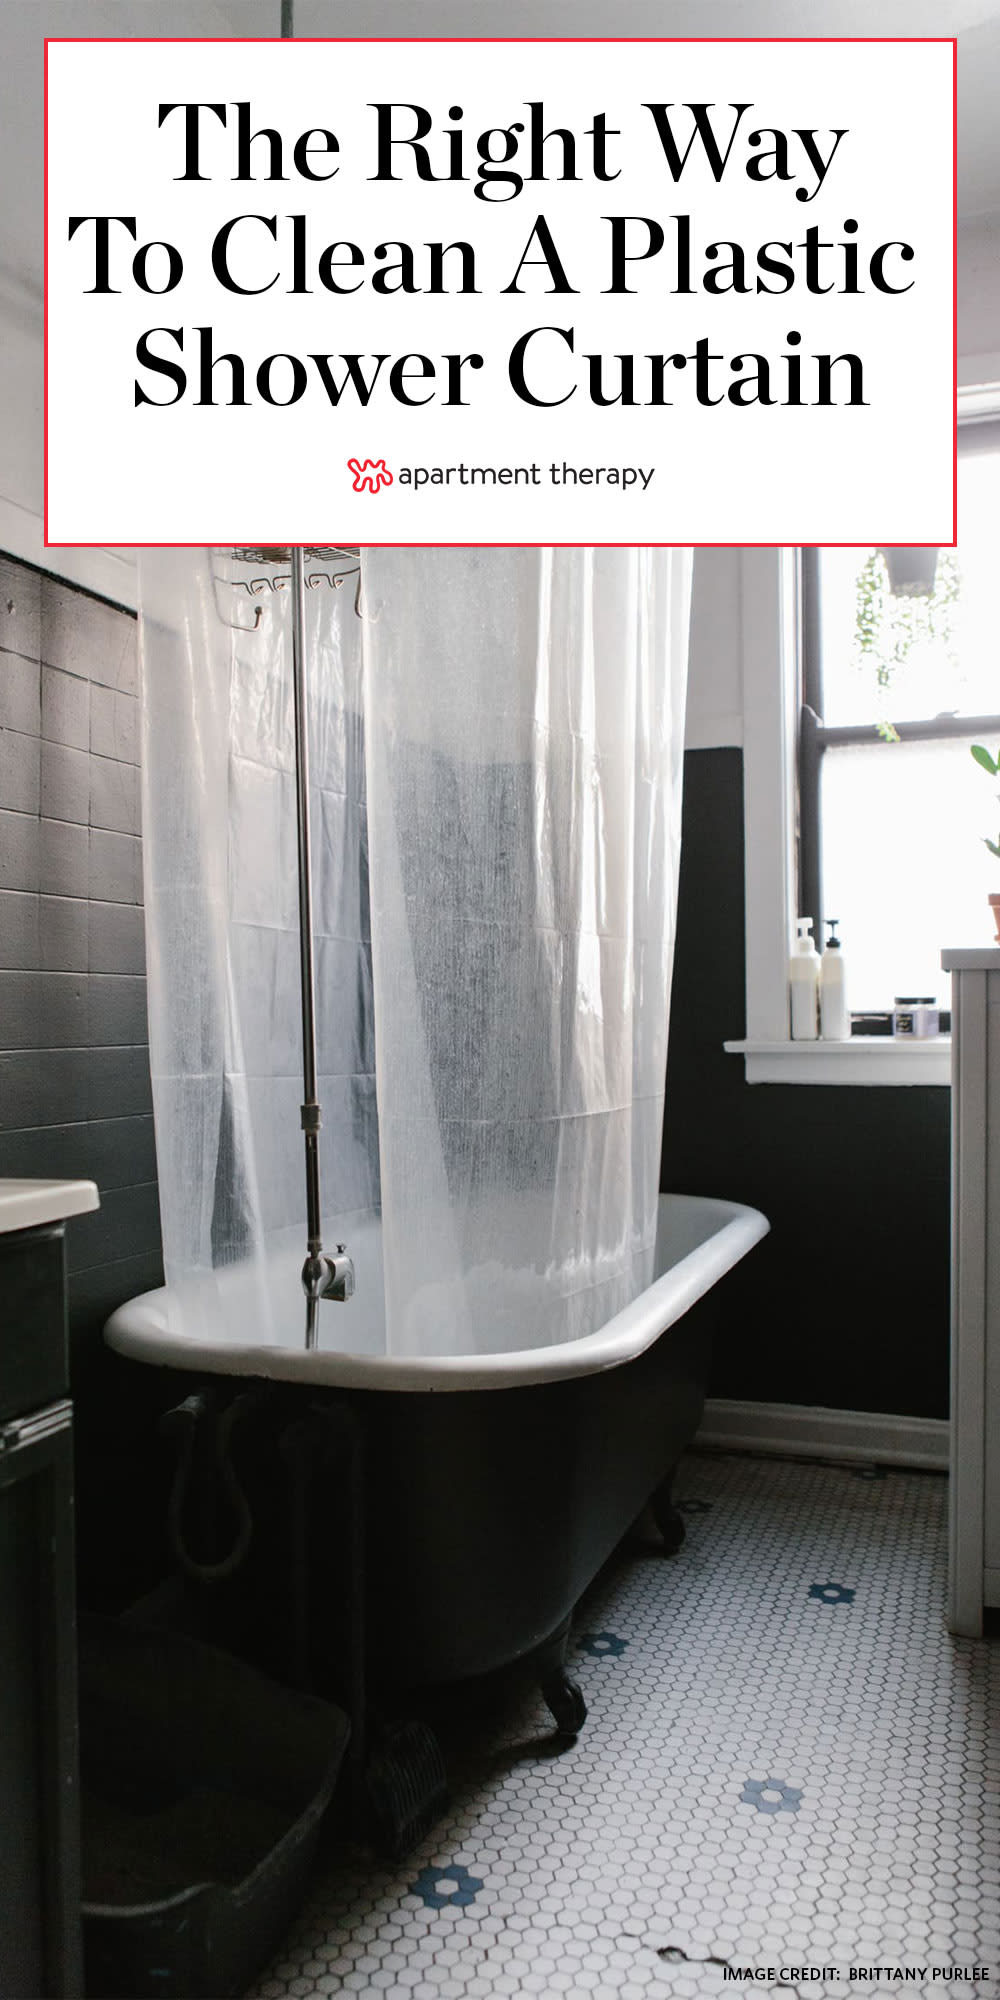 How to Clean a Plastic Shower Curtain or Liner: Step by Step Guide